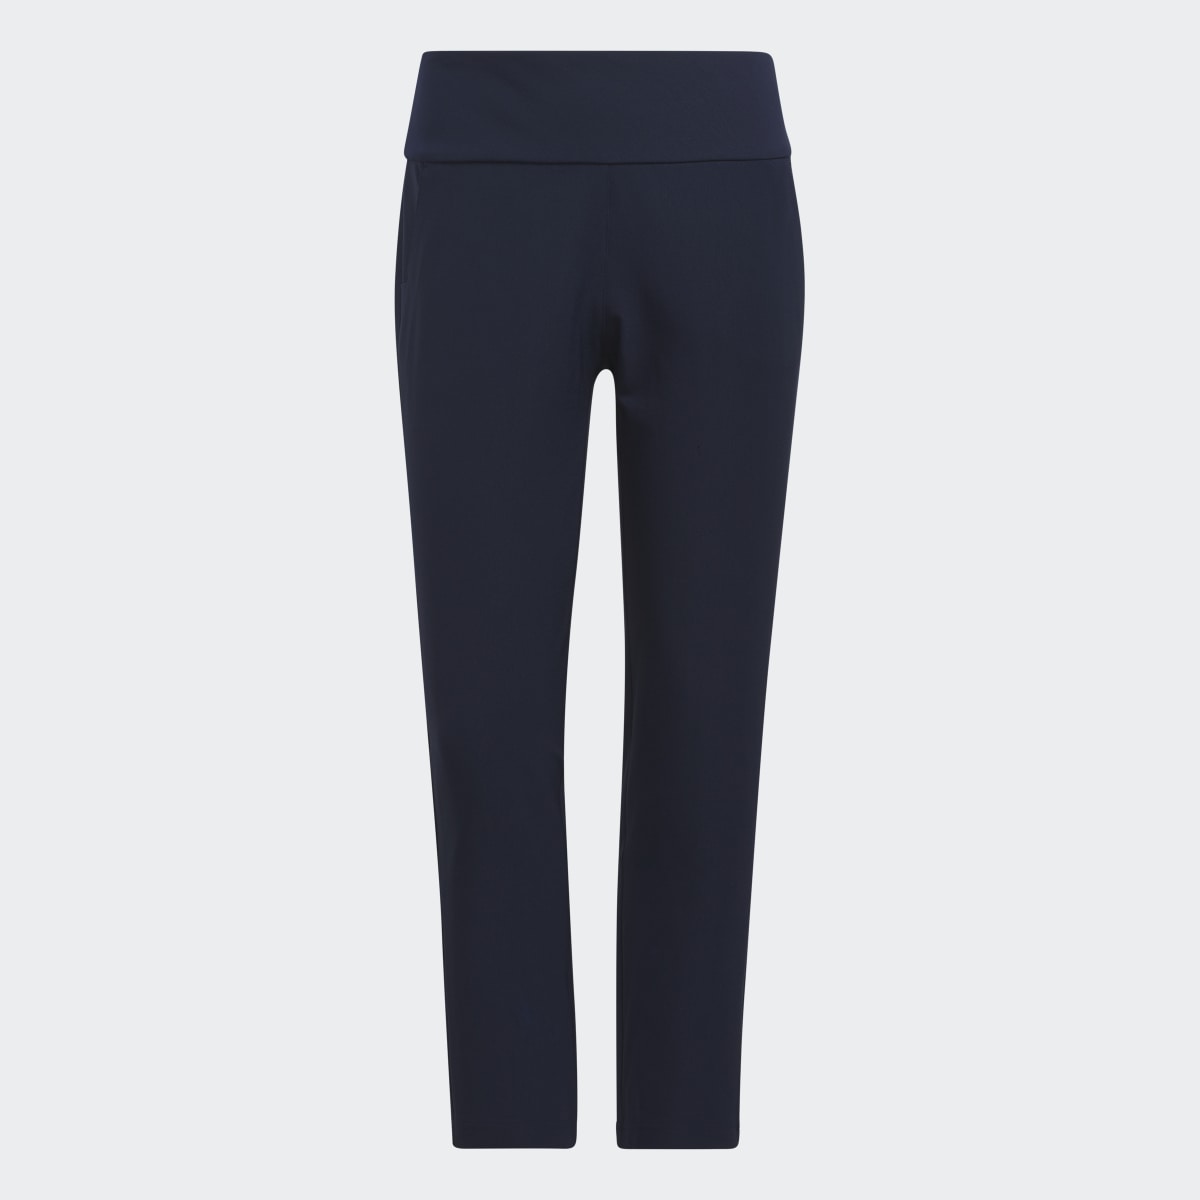 Adidas Pull-On Ankle Pull-On Ankle Golf Pants. 4